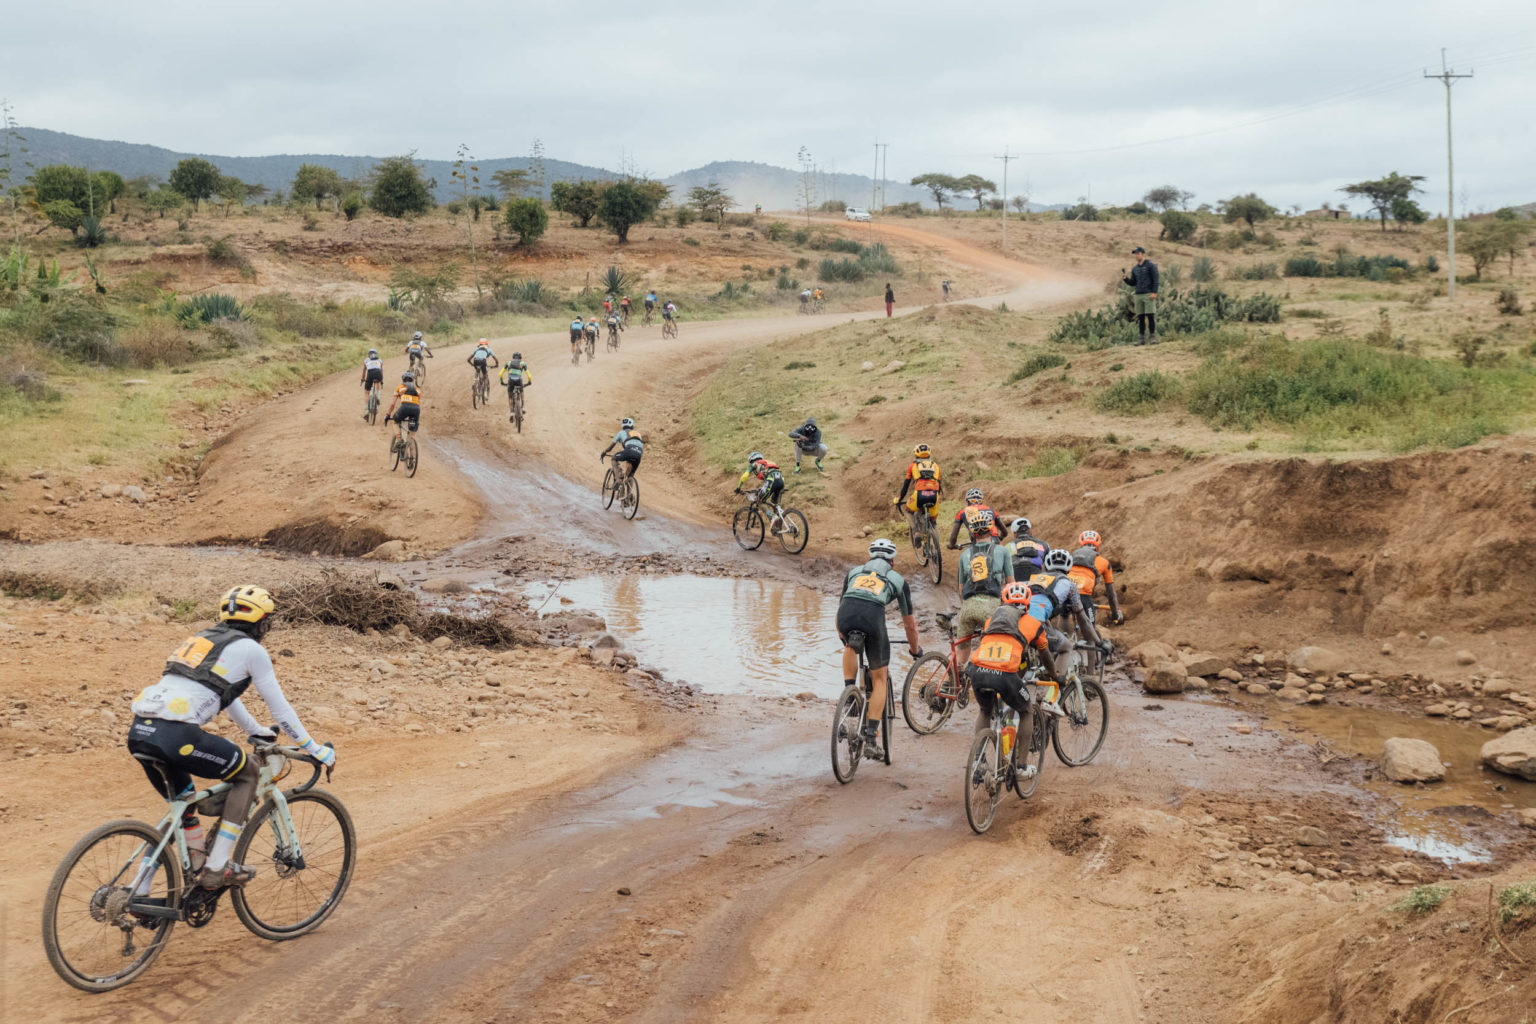 Six Perspectives on the 2021 Migration Gravel Race in Kenya